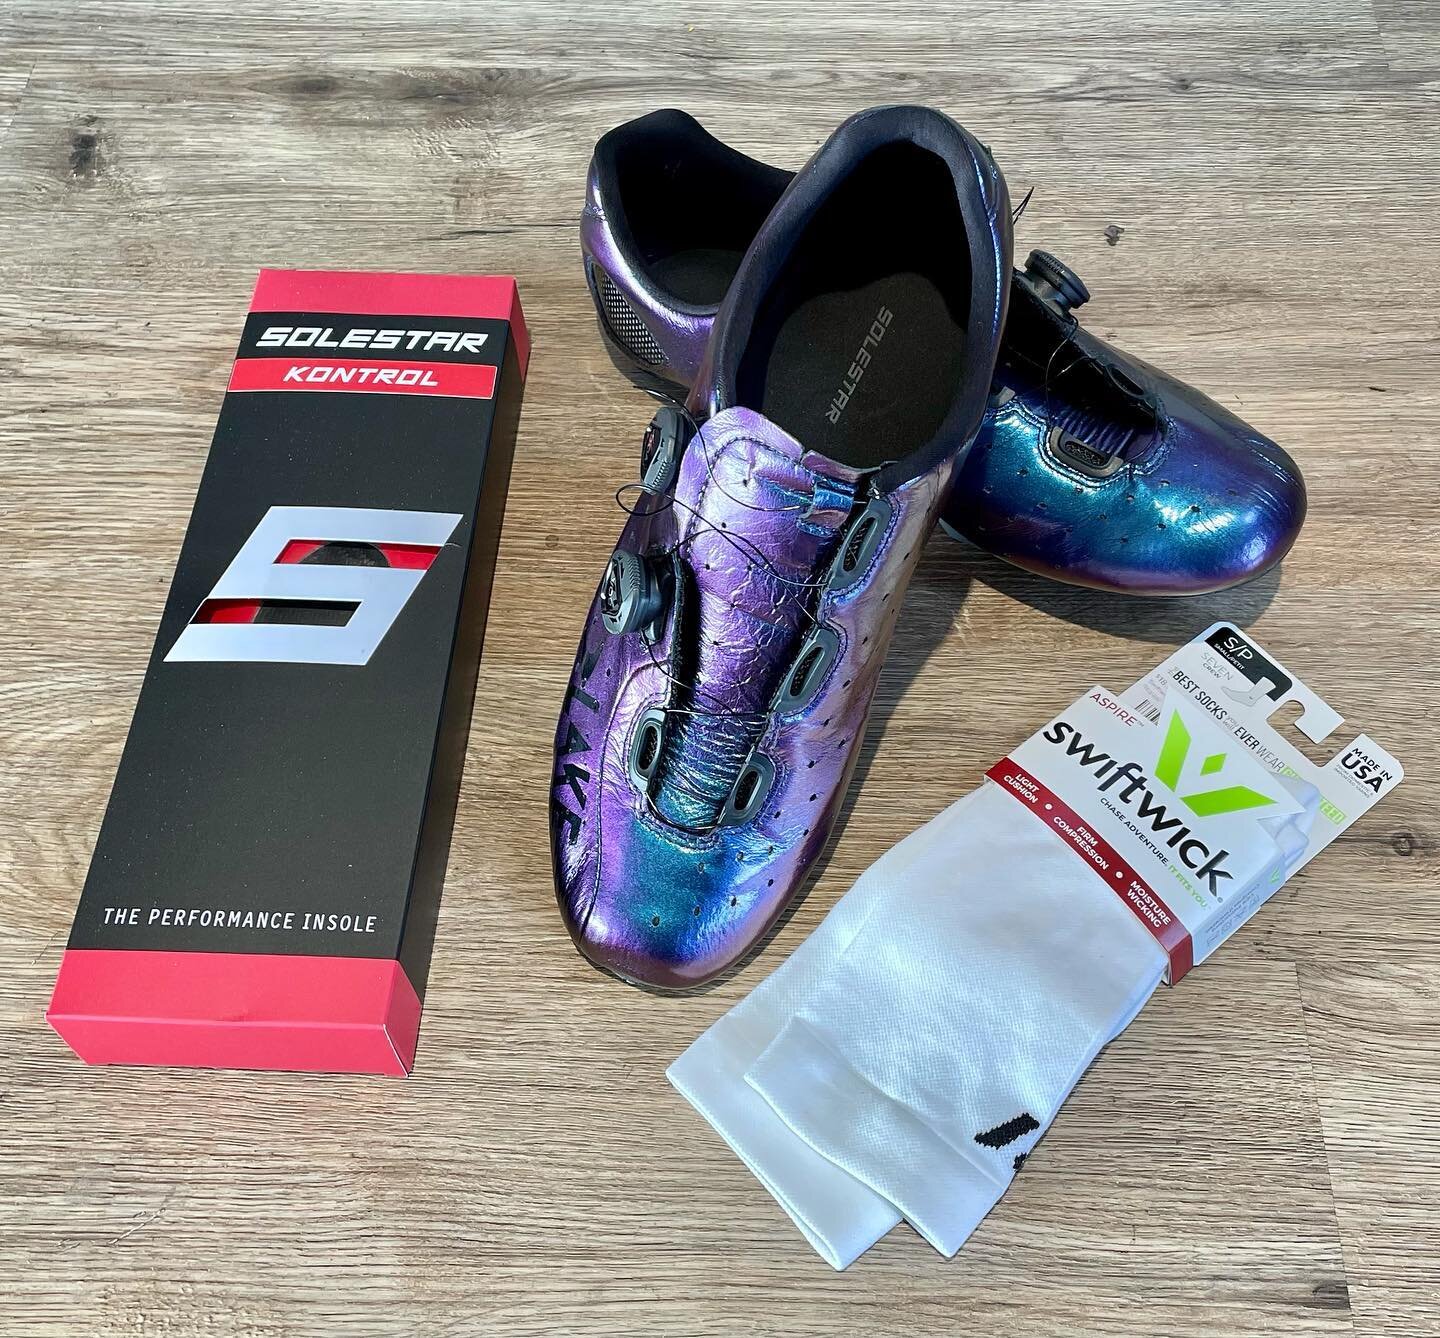 New personal favorite combo @solestar_insoles @lakecycling @swiftwicksocks. Getting the foot dialed in w the help of @dialedinfitting. Makes such a difference in comfort, power transfer, and injury prevention. Its not always easy. It sometimes requir